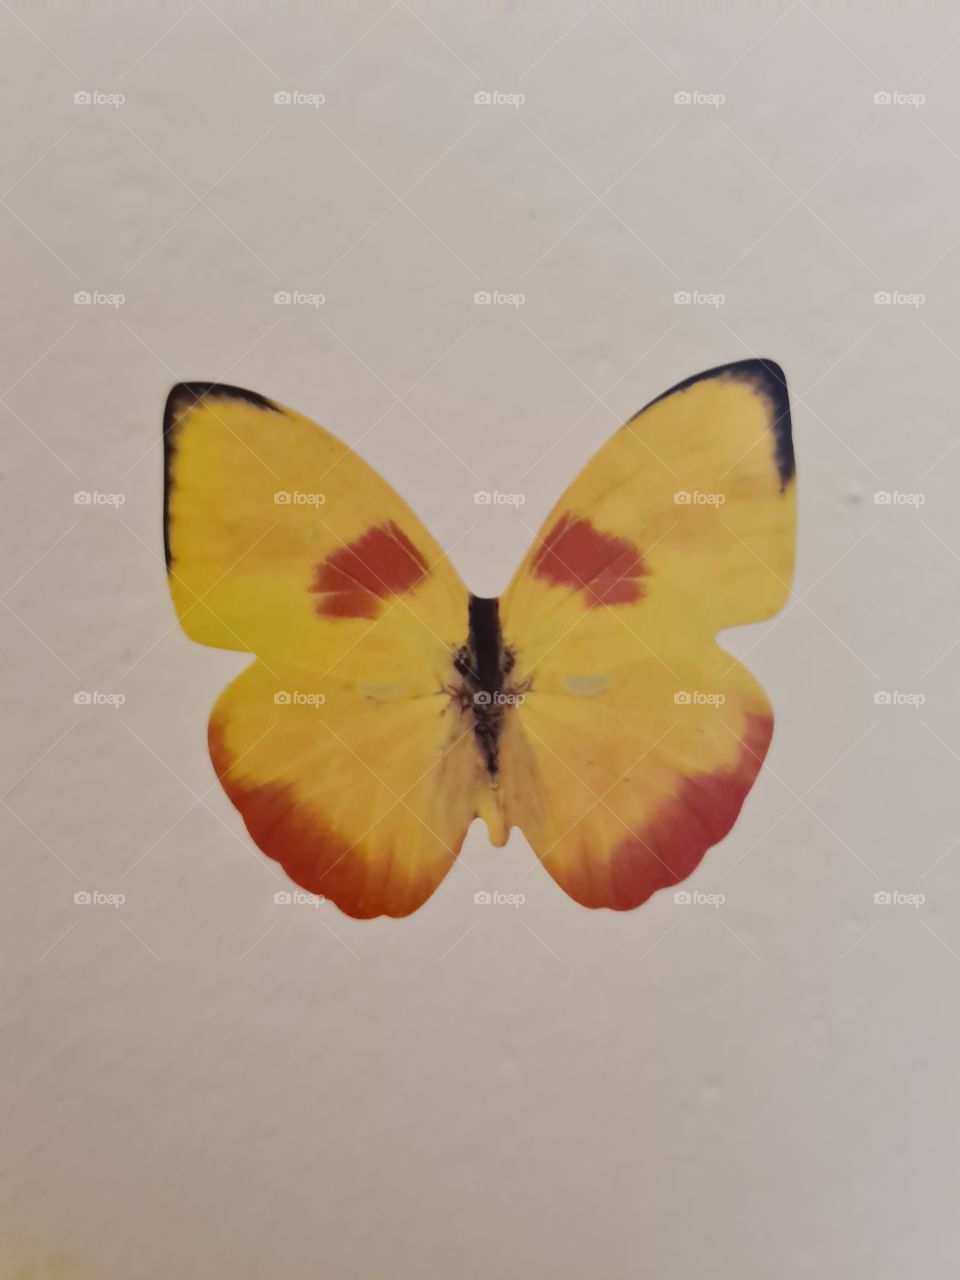 Bright yellow and dark orange butterfly sticker attached on light yellow wall as background.